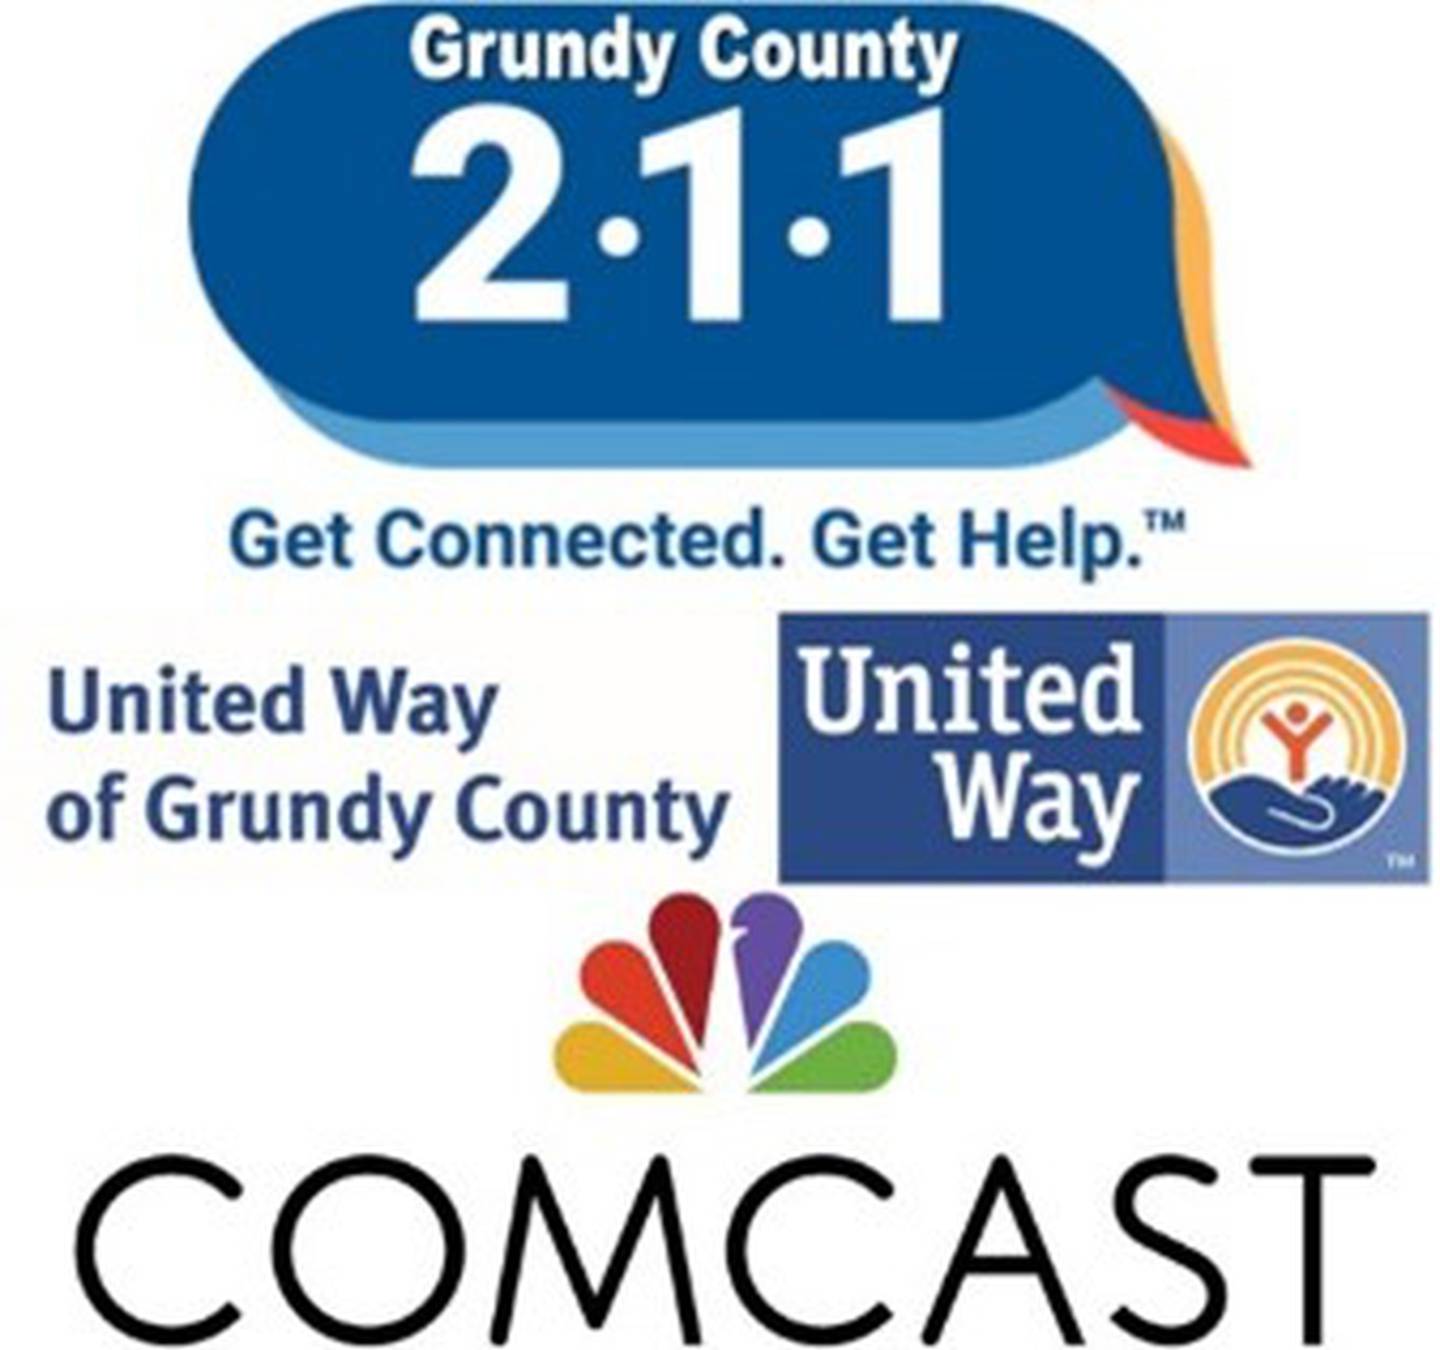 The United Way of Grundy County and Comcast recently teamed up to help make a positive impact in Grundy County.